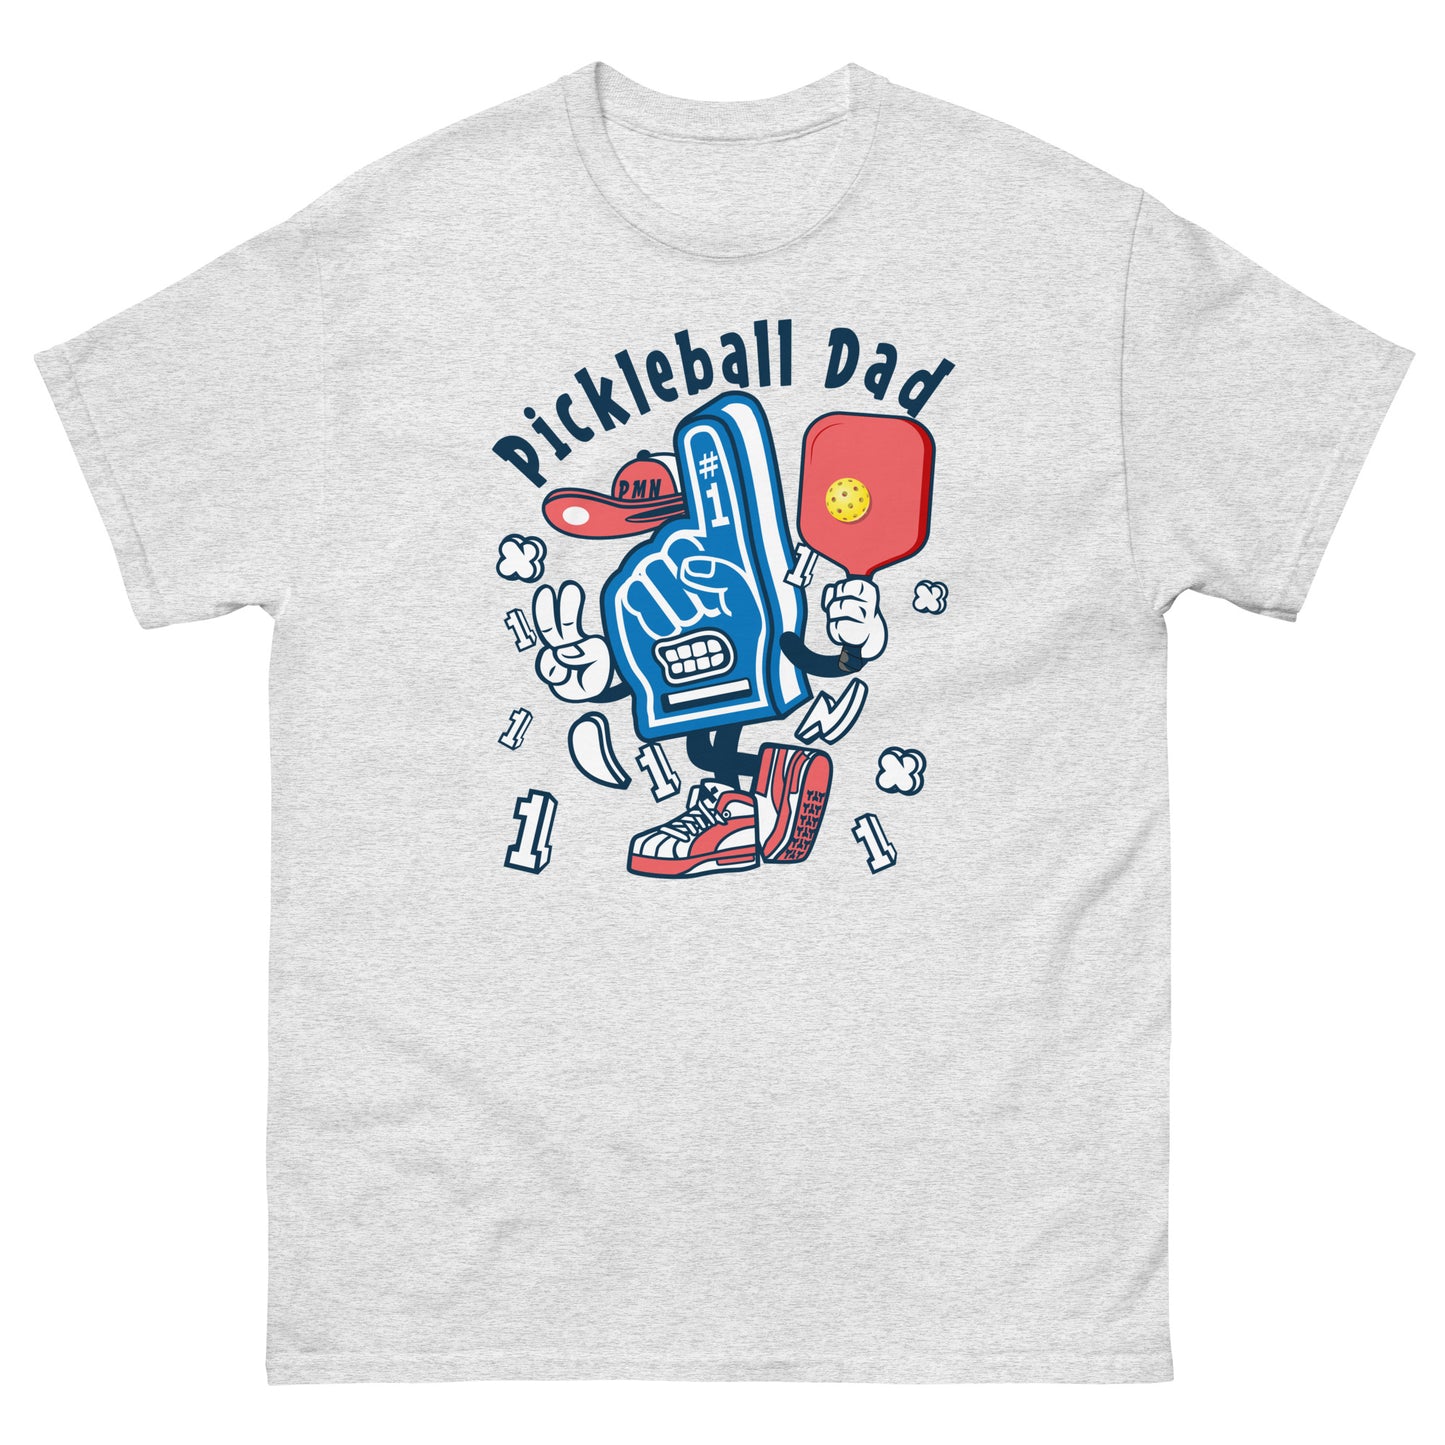 Retro Pickleball Pun: "Number One Pickleball Dad Glove", Father's Day Mens Ash T-Shirt